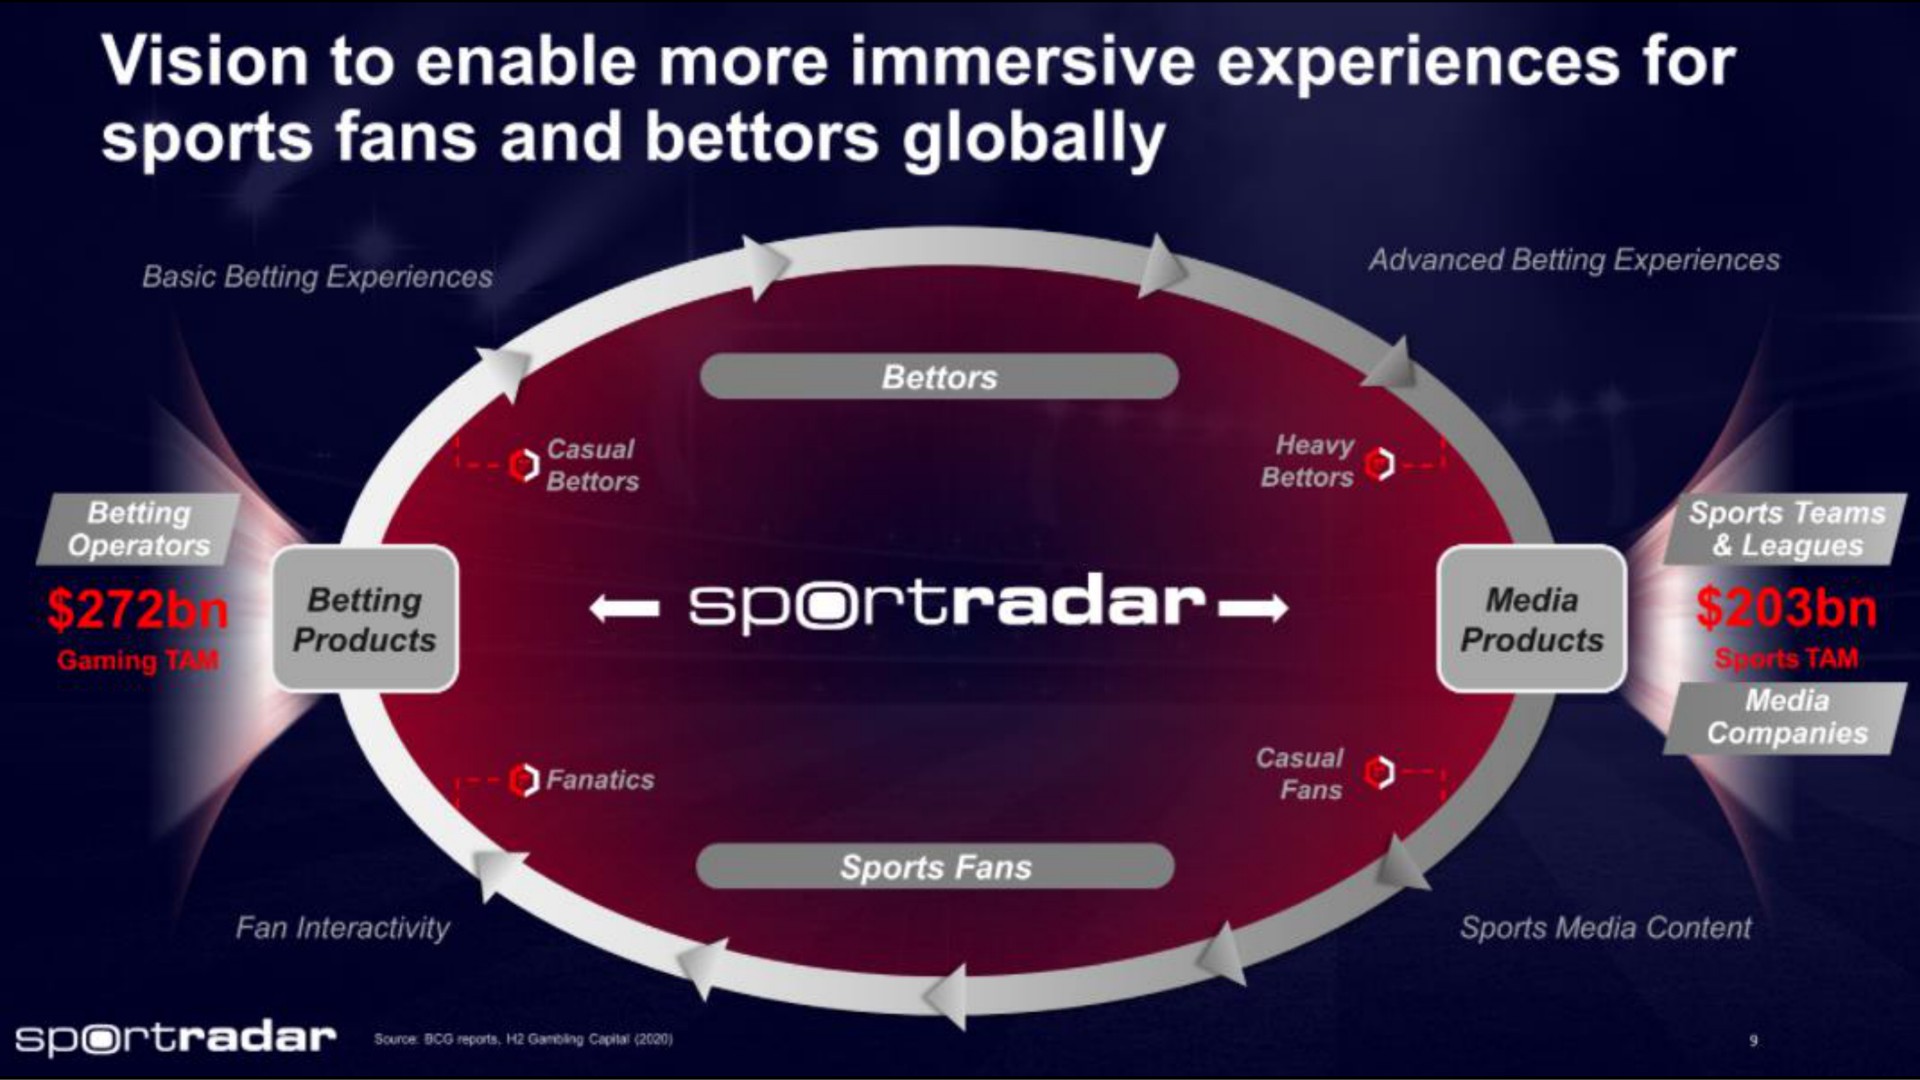 vision to enable more immersive experiences for sports fans and bettors globally | Sportradar